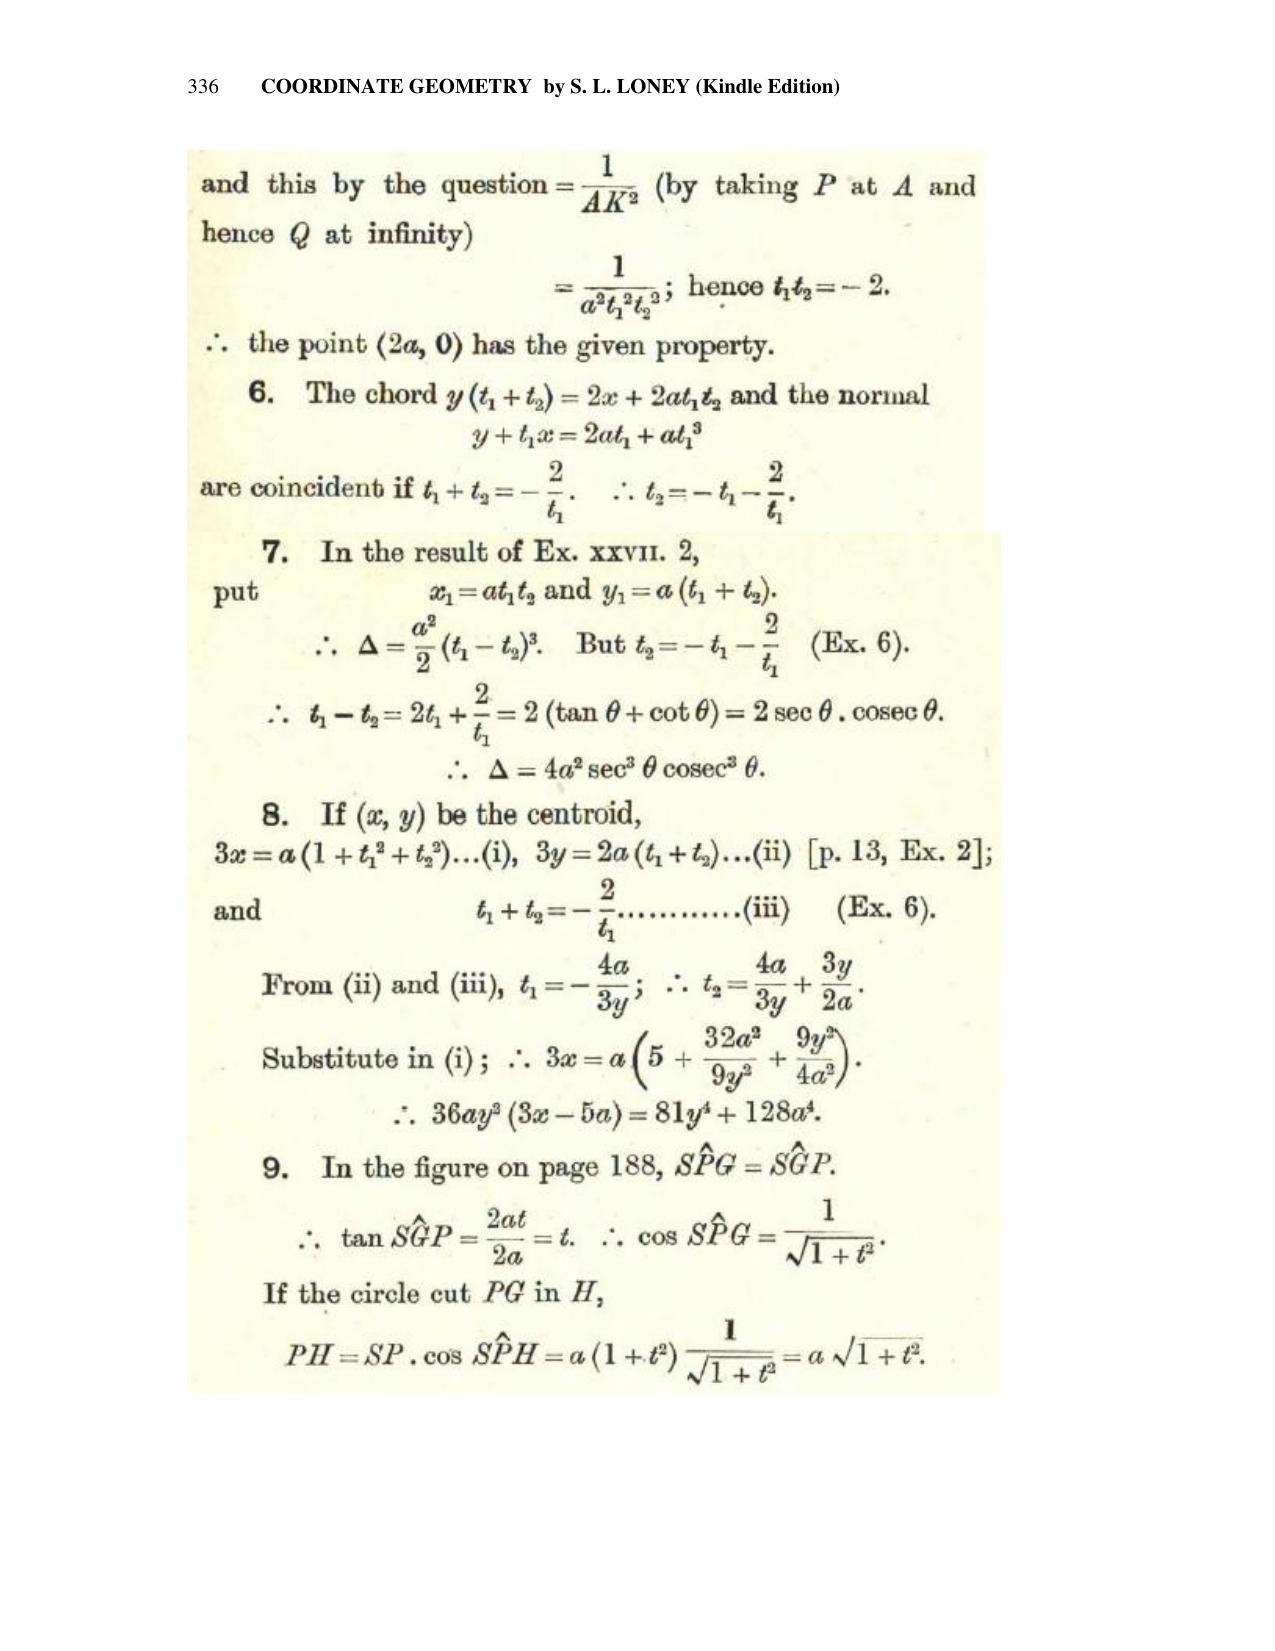 Chapter 10: The Parabola - SL Loney Solutions: The Elements of Coordinate Geometry - Page 50